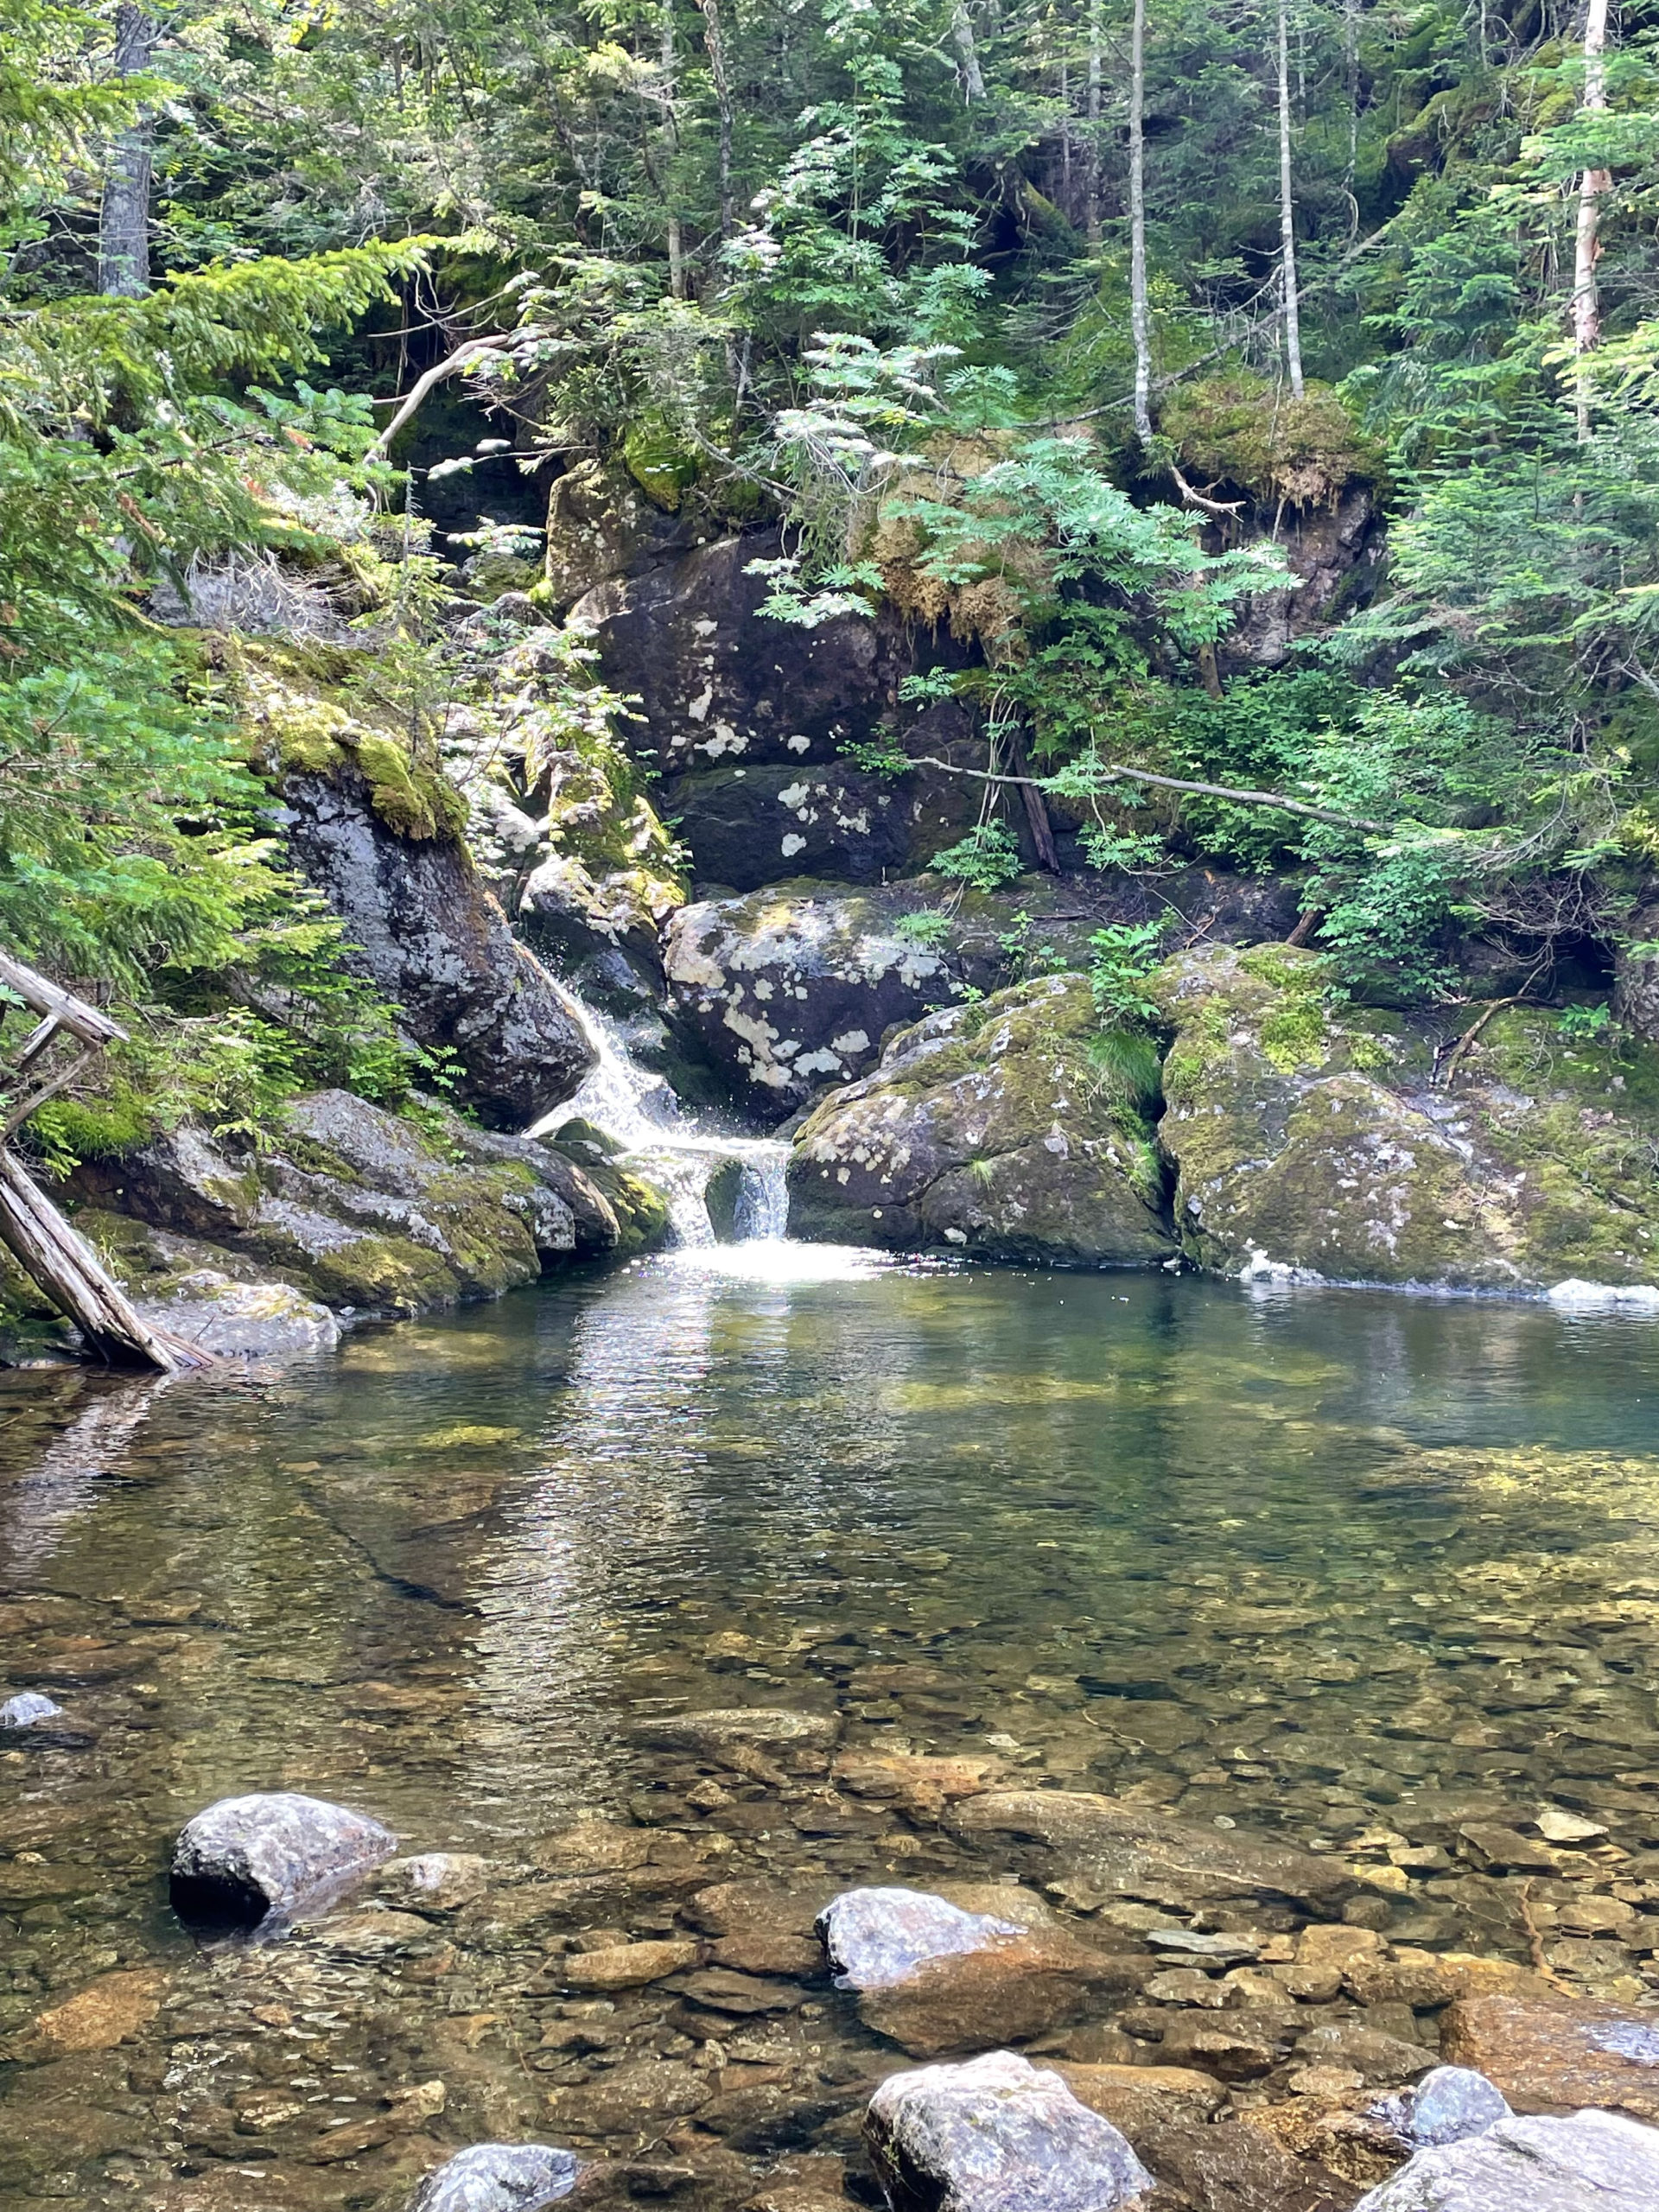 Emerald Pool, seen while hiking Mt. Pierce and Mt. Jackson in the White Mountains National Forest, New Hampshire